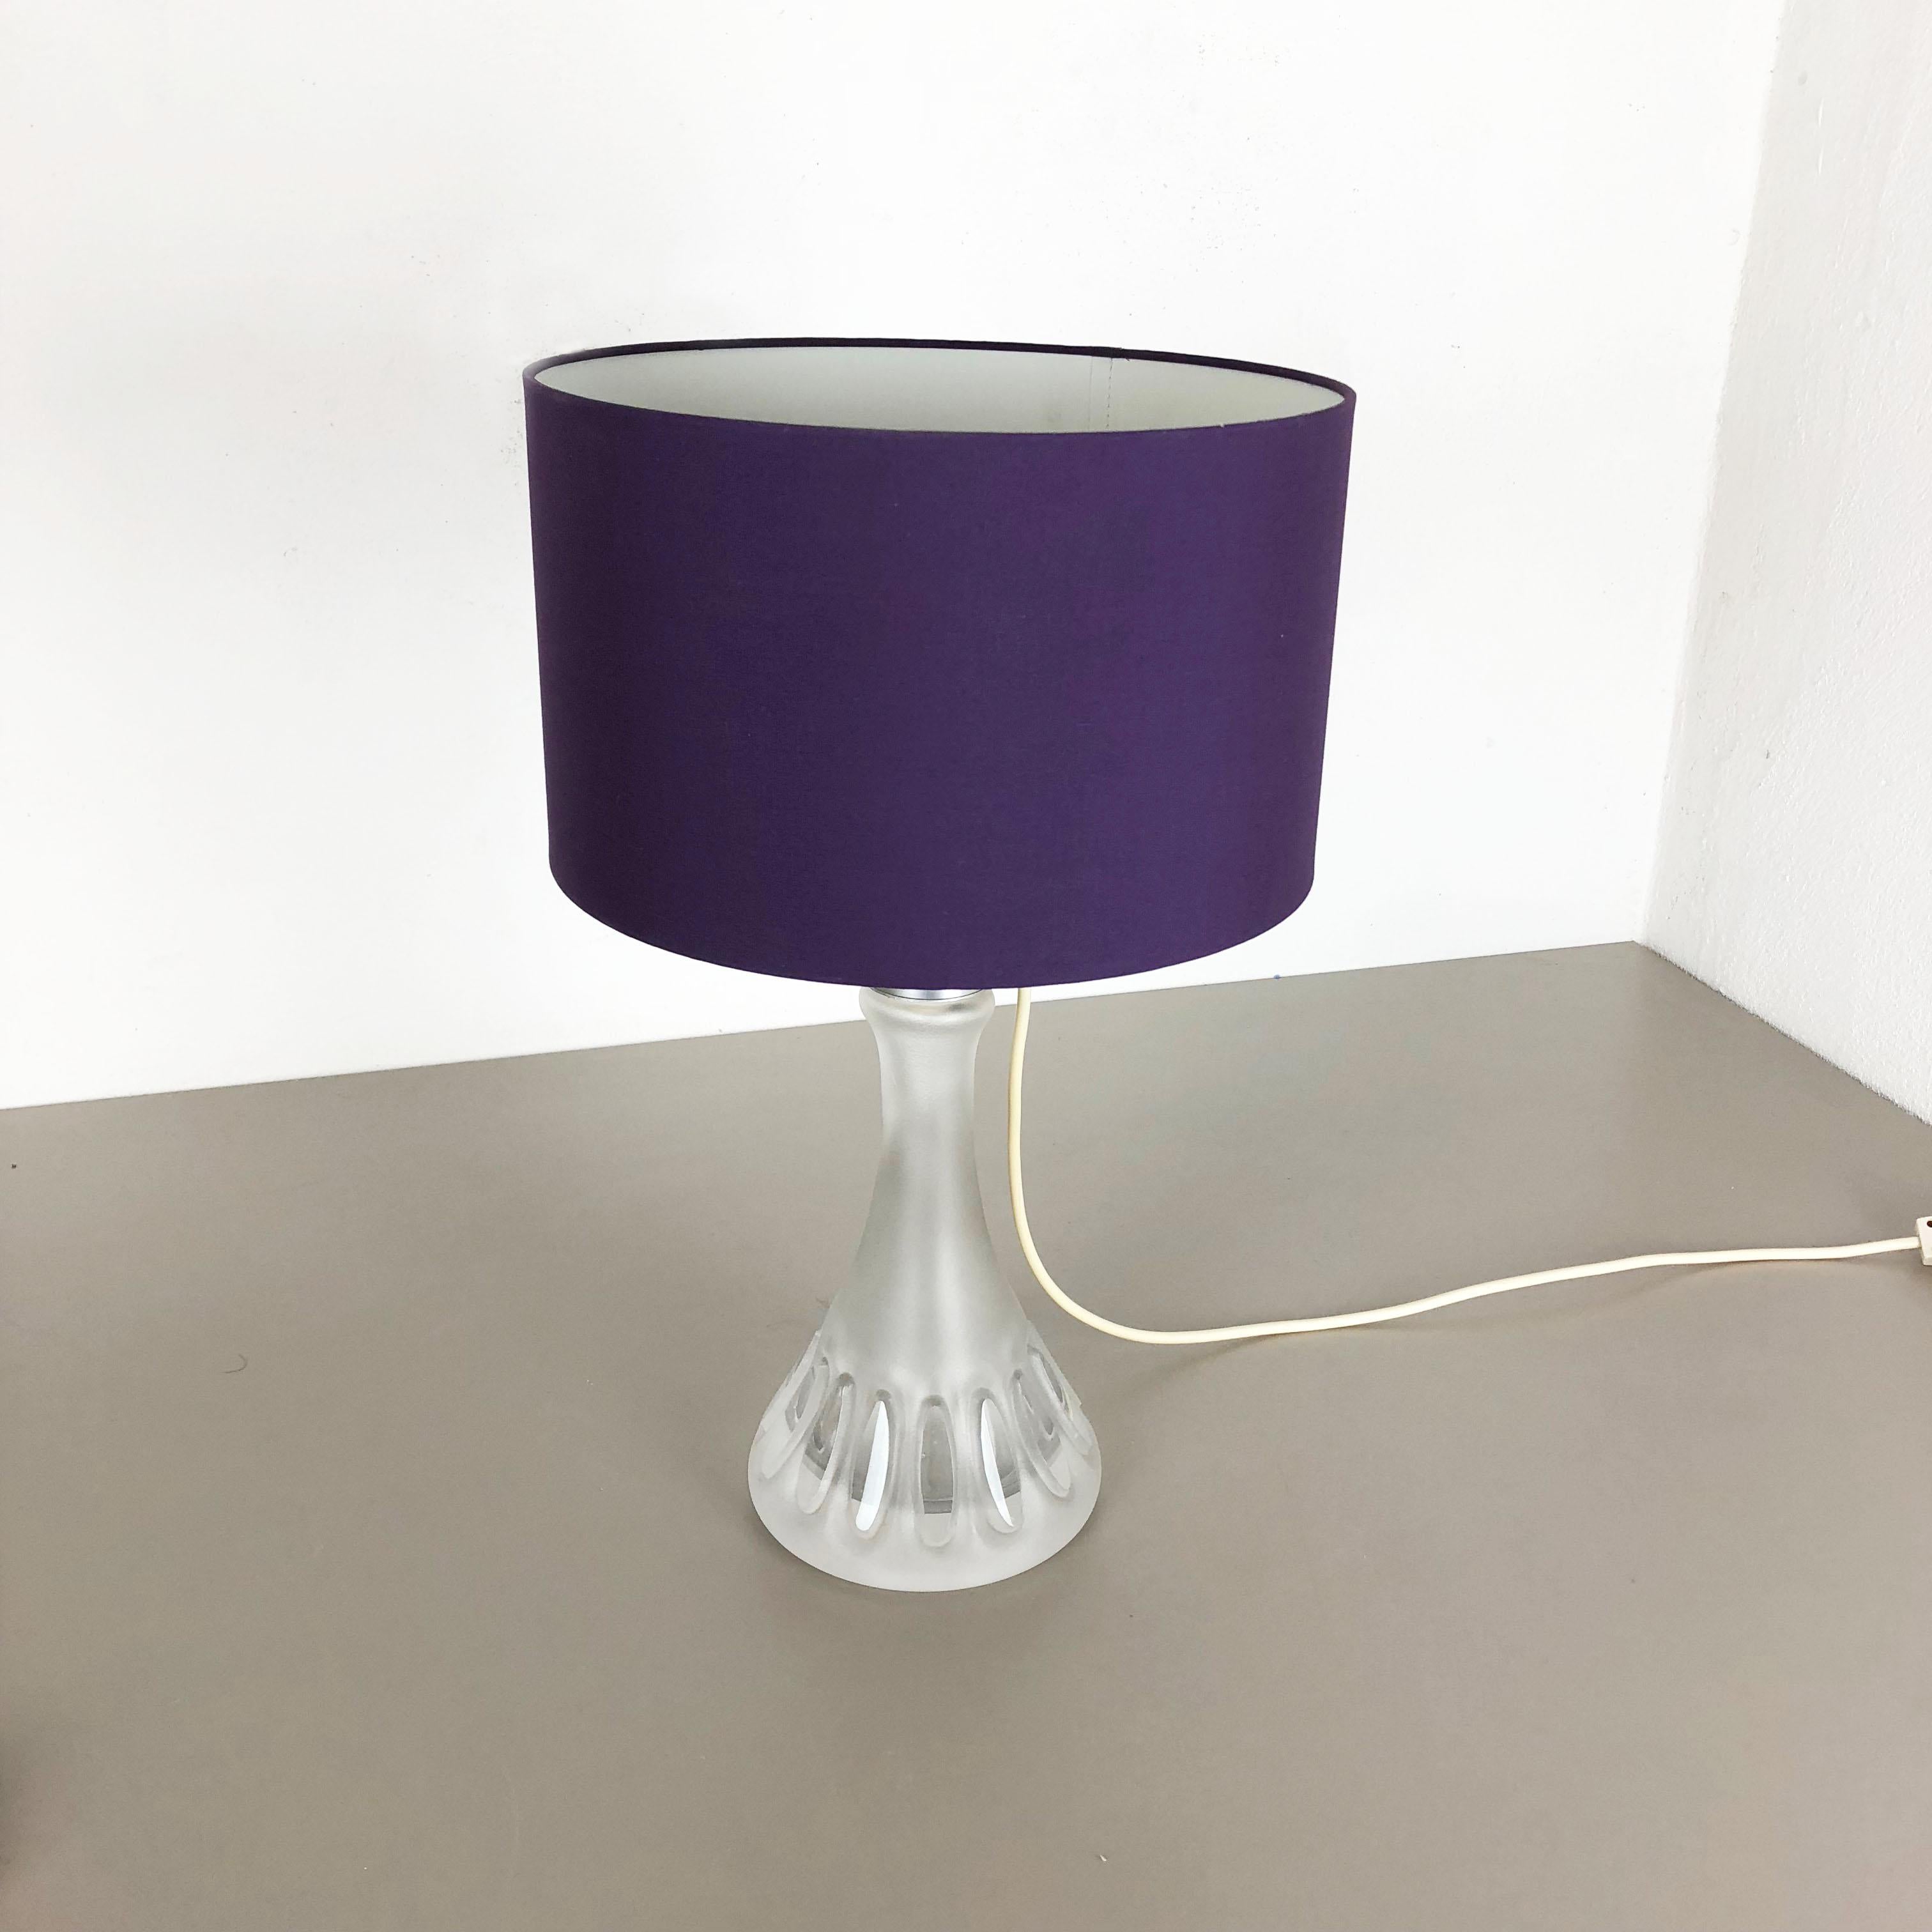 Article:

Tulip glass desk lamp


Producer:

Peill & Putzler, Germany



Age:

1970s



 

Original desktop light made in the 1970s by Peil & Putzler in Germany. The base element is made of glass in tulip form, with diameter of